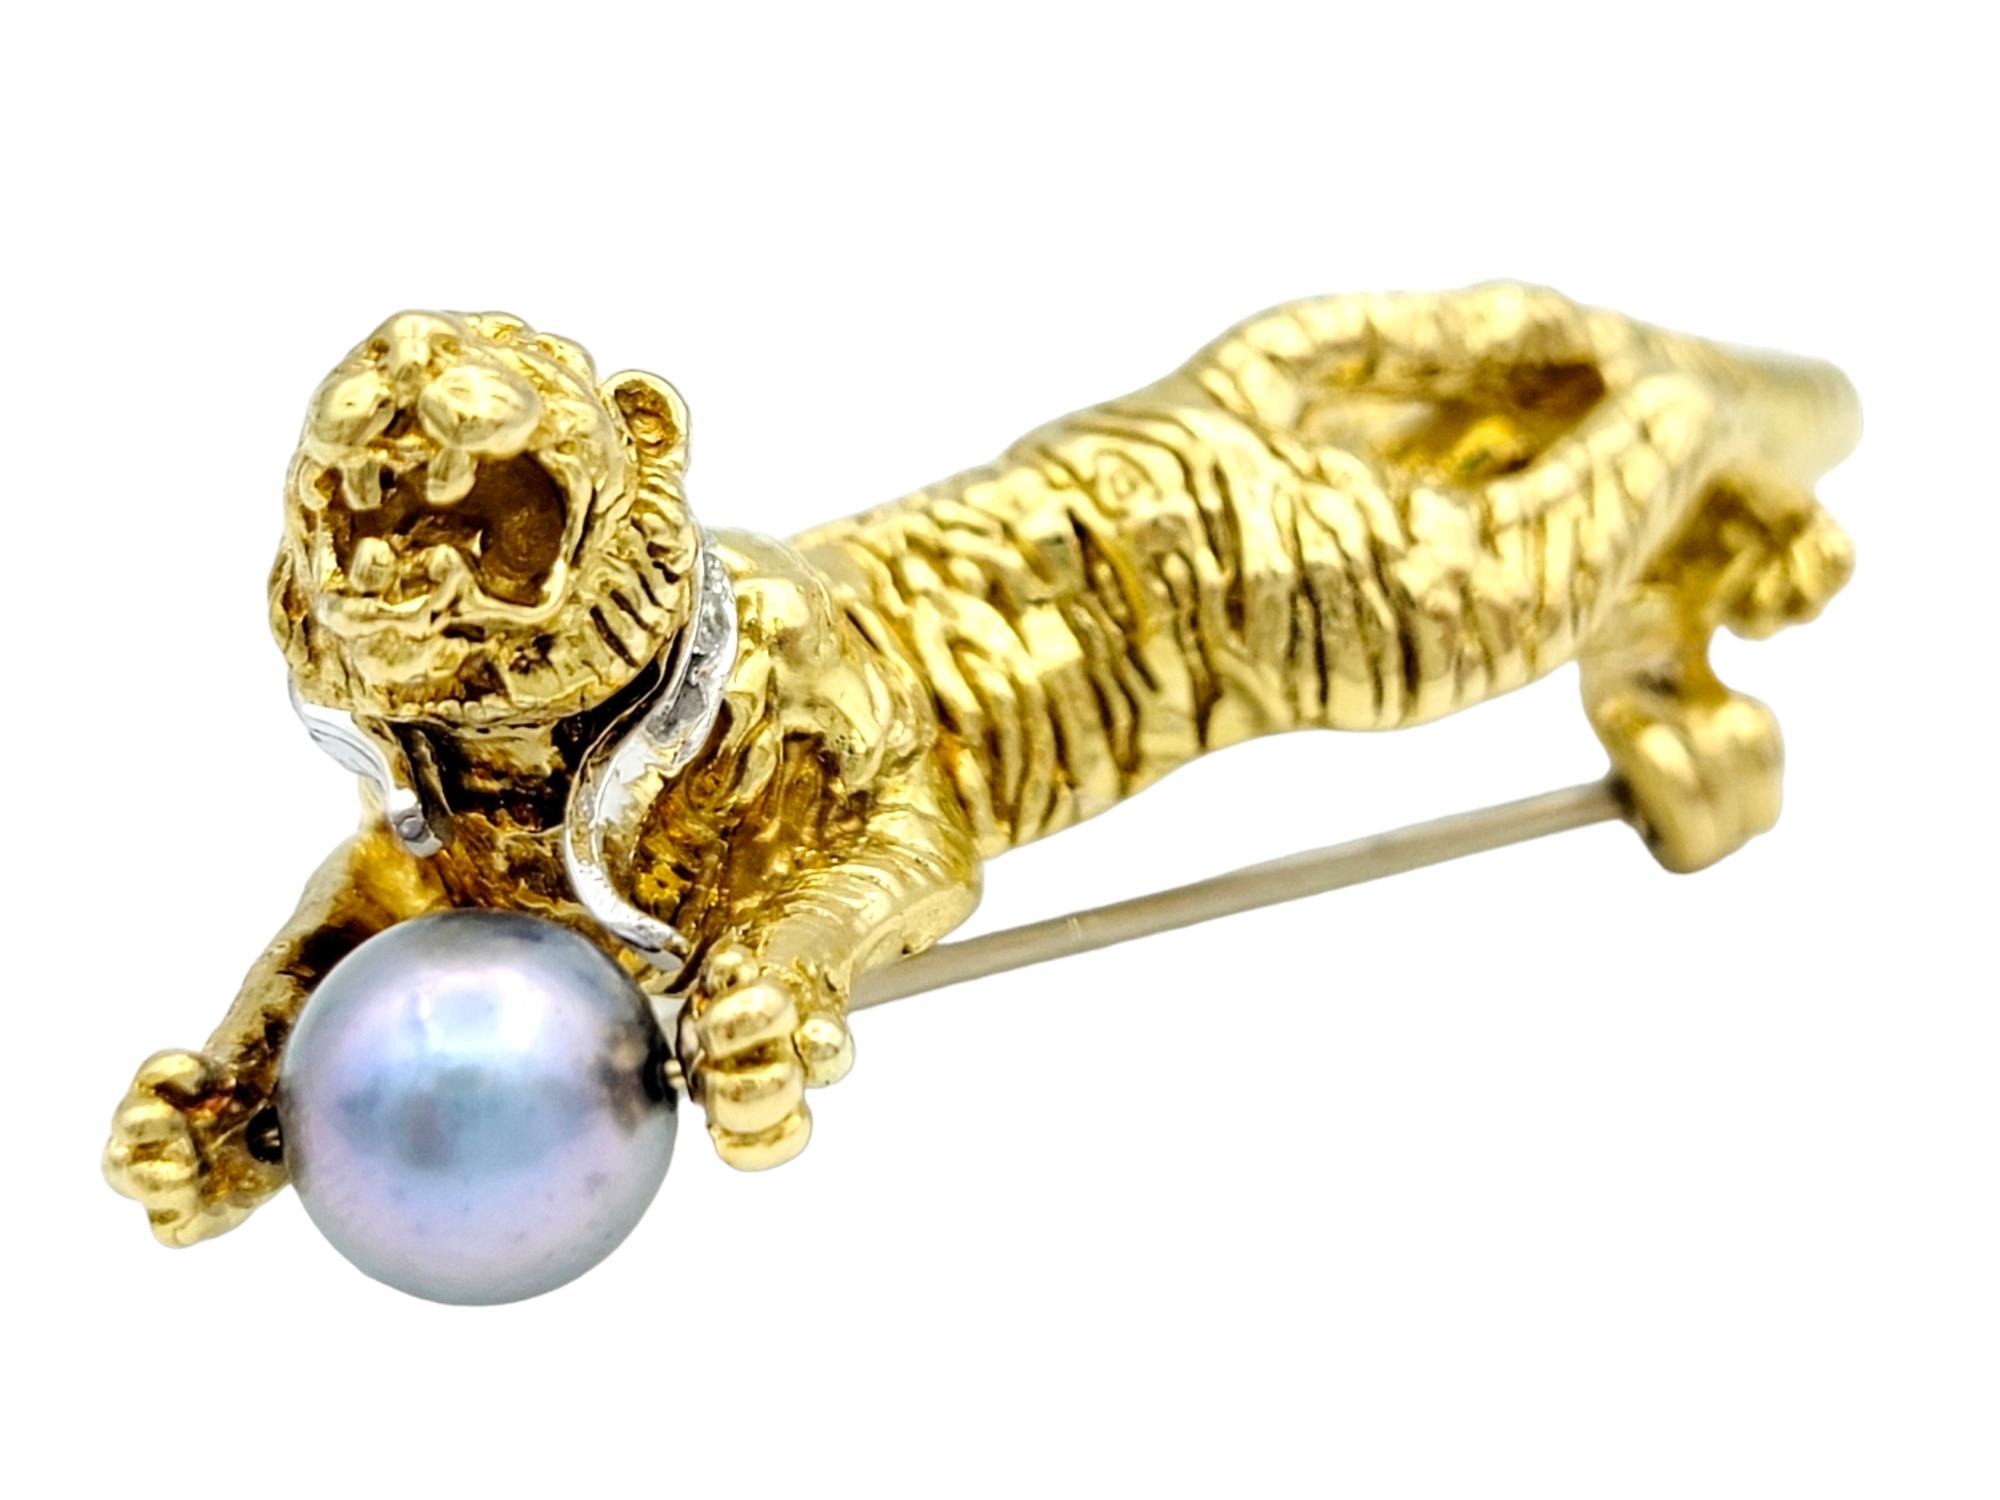 This exquisite 18 karat yellow gold brooch is a masterful work of art, meticulously crafted to depict a lifelike full-body tiger. The level of detail in this piece is truly remarkable, capturing the majestic grace of this magnificent creature. The